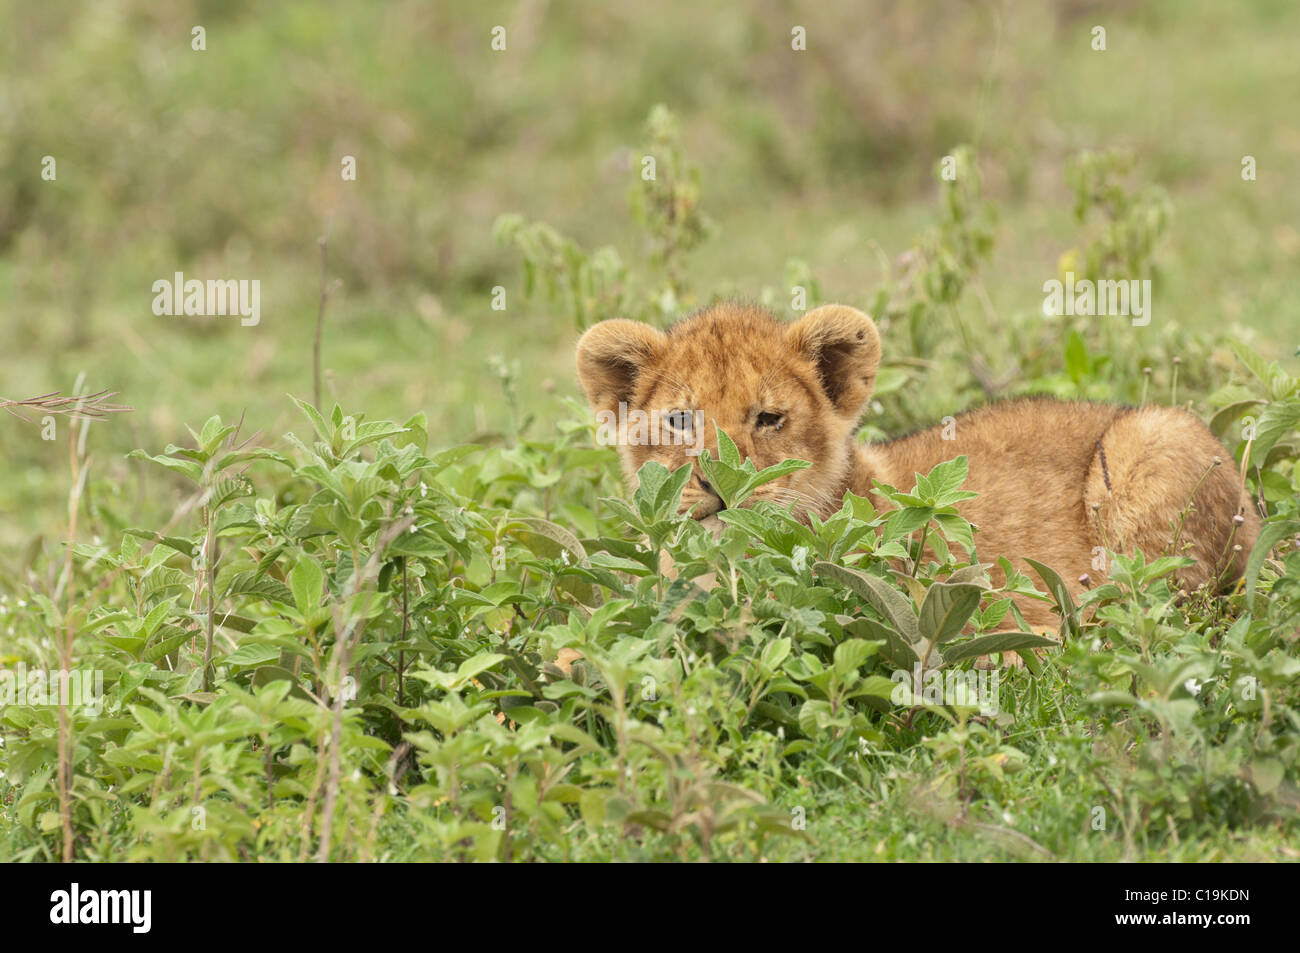 Stock photo of a lion cub resting in green vegetation. Stock Photo